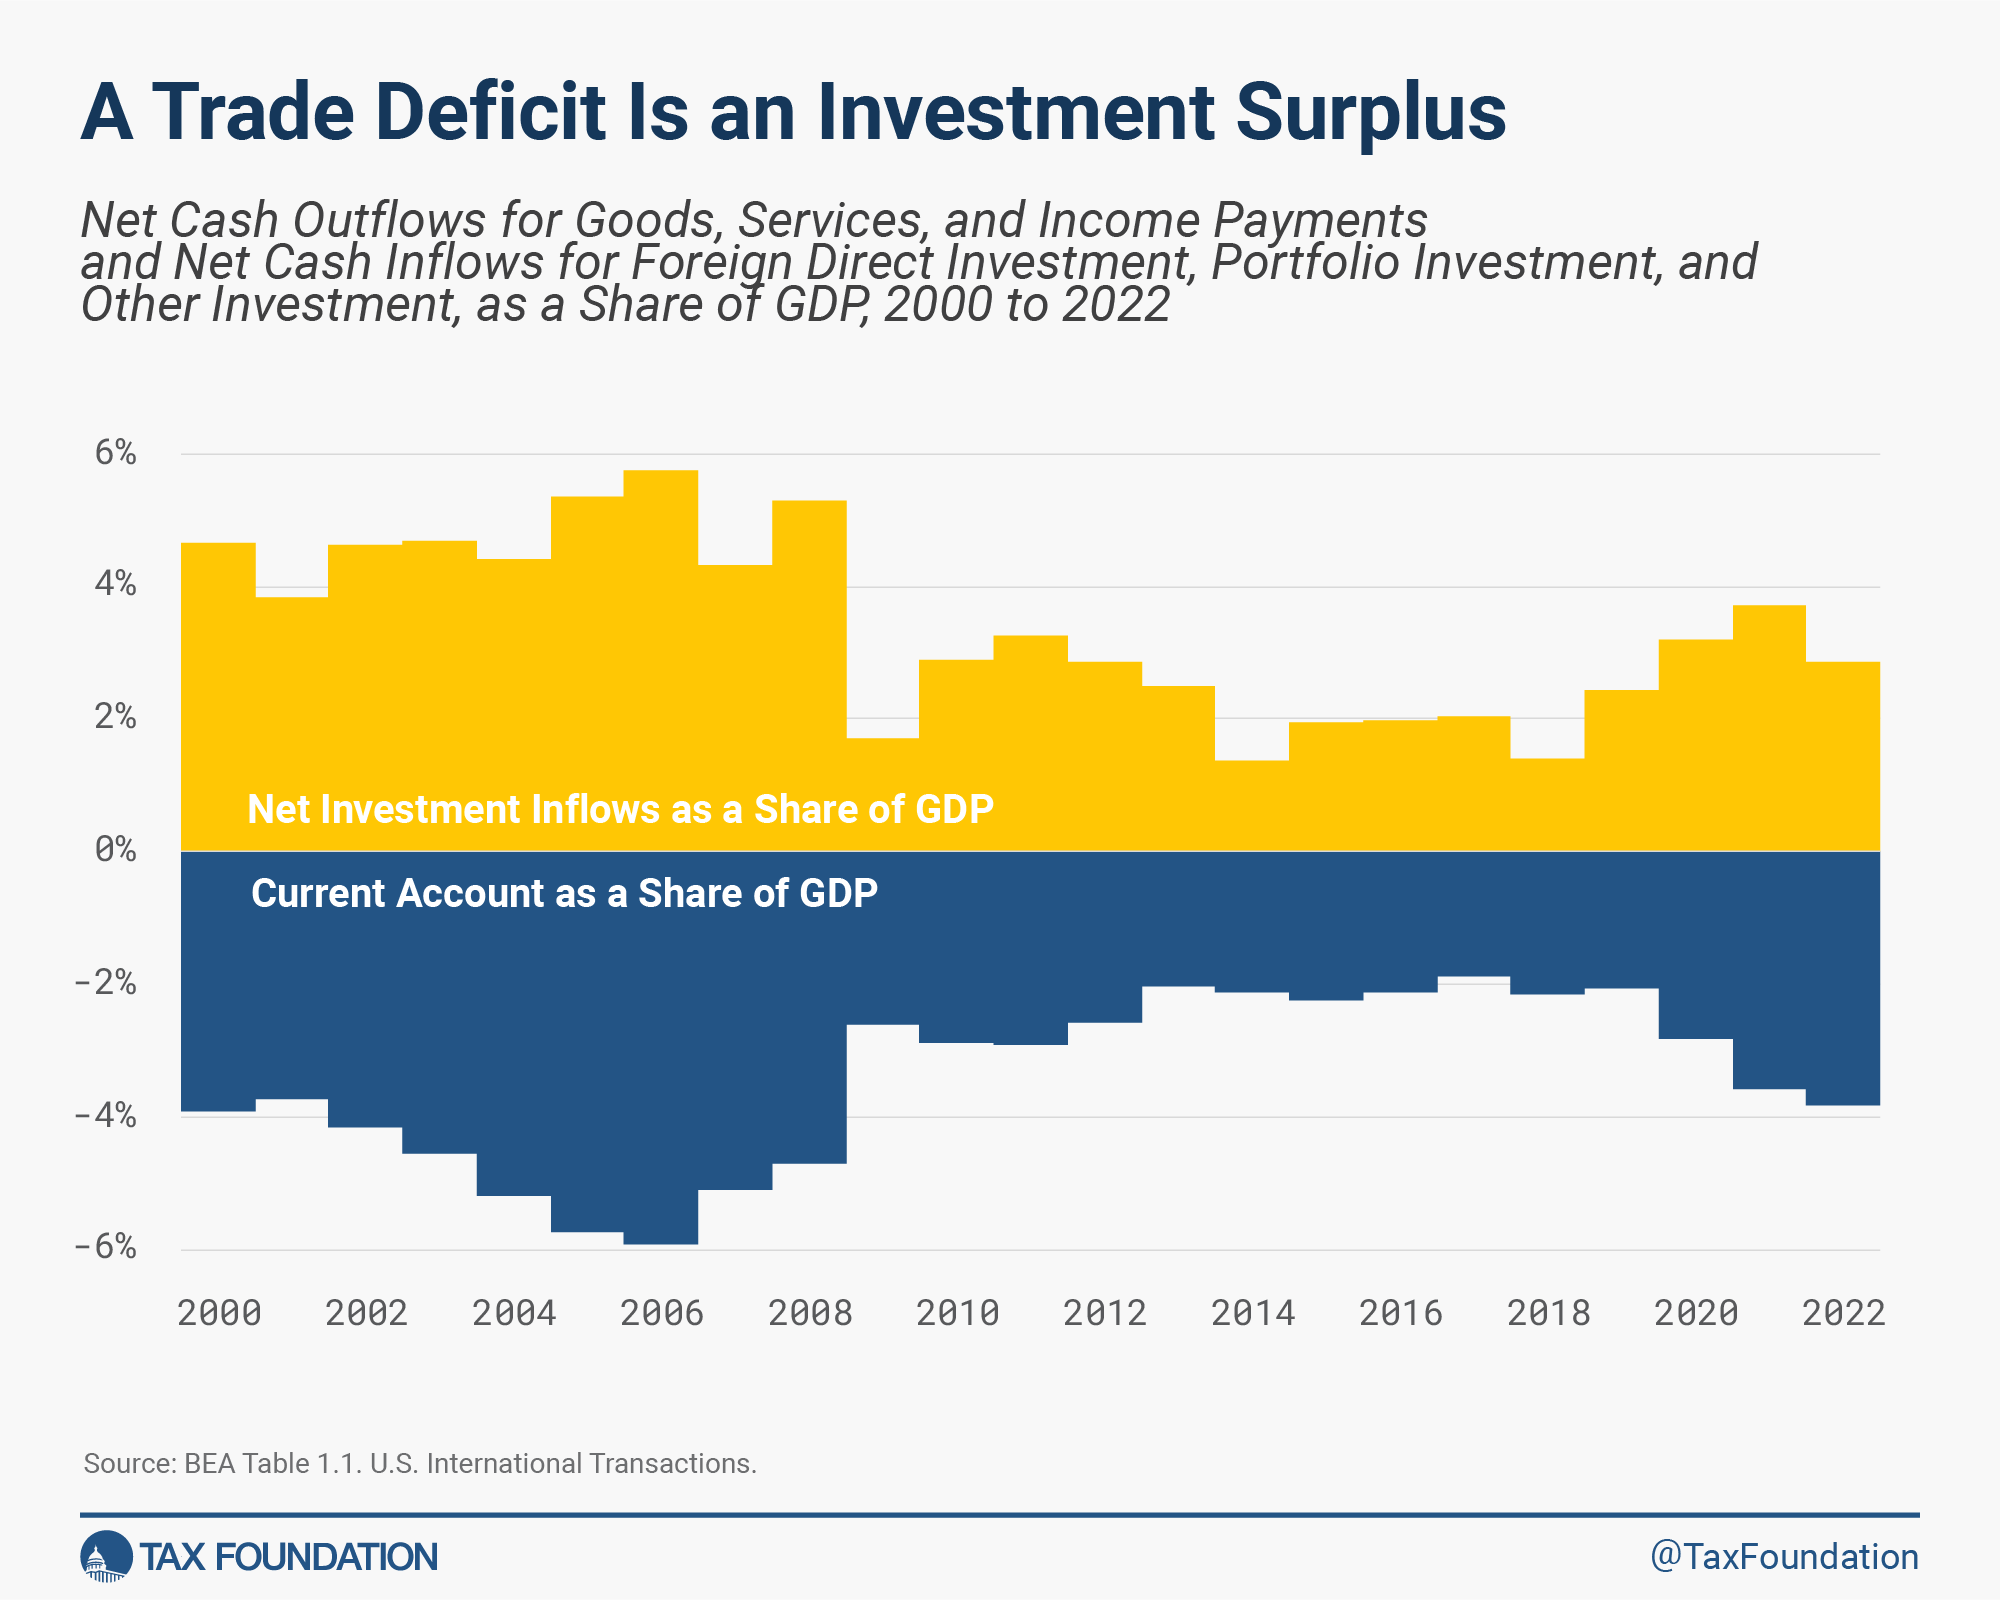 A trade deficit is an investment surplus